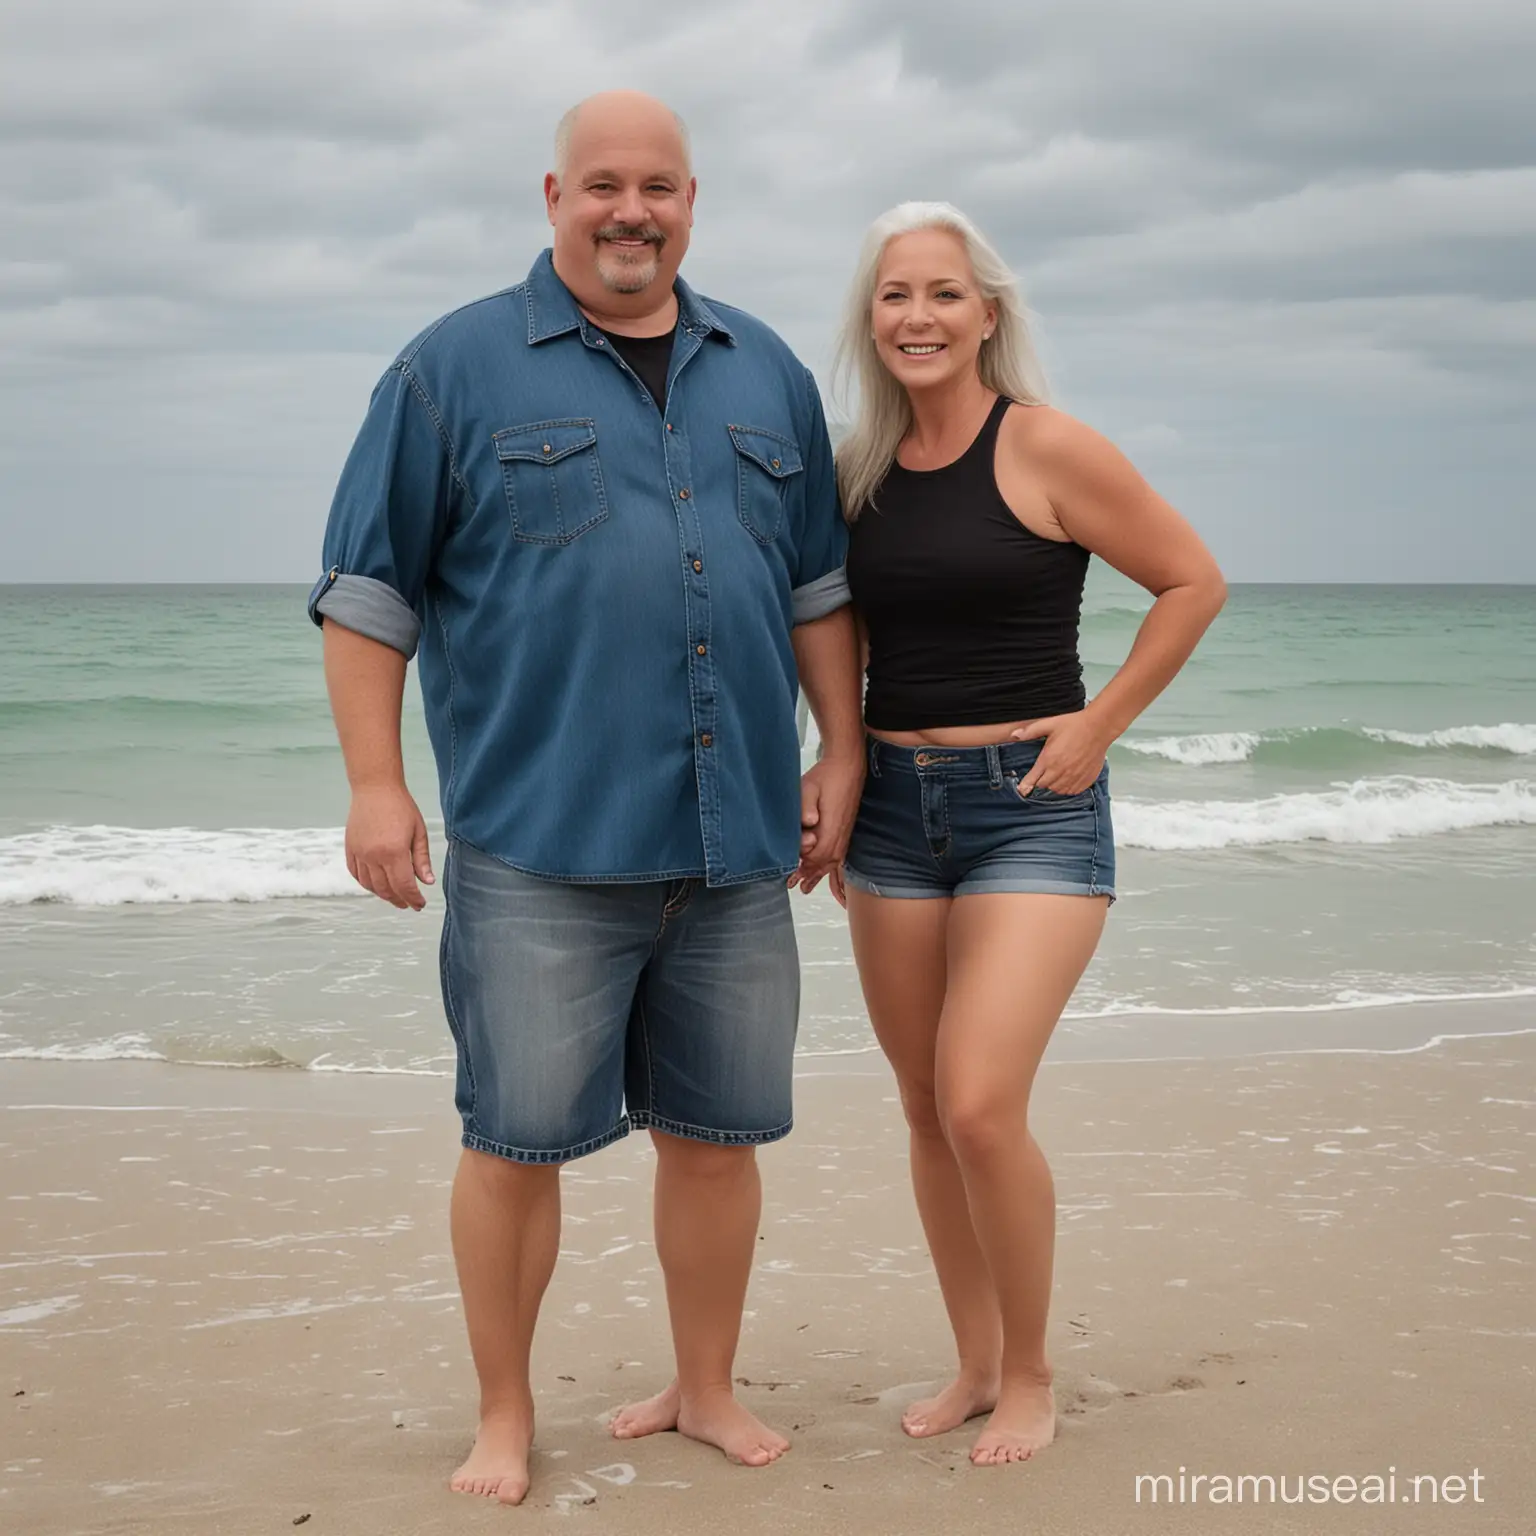 husband and wife on Florida sandy beach, fat chubby husband short, fat, bald, goatee, wearing jeans shorts and black button down shirts, wife 55 years old, thin, fit, silver hair, wearing shiny black pantyhose, denim blue jean shorts, grey tank top